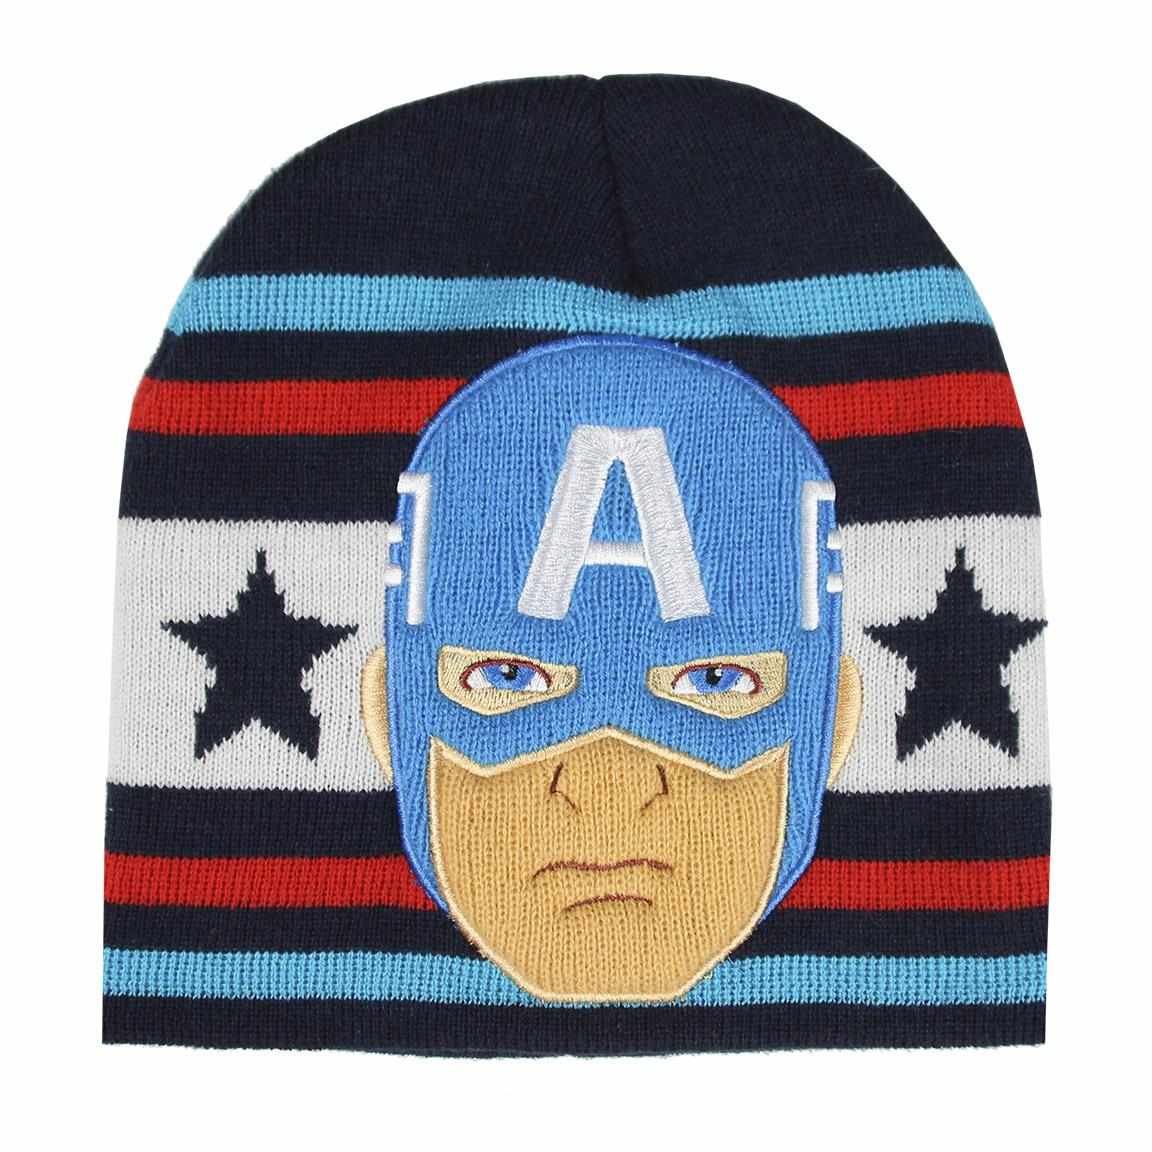 HAT WITH APPLICATIONS AVENGERS CAPITAN